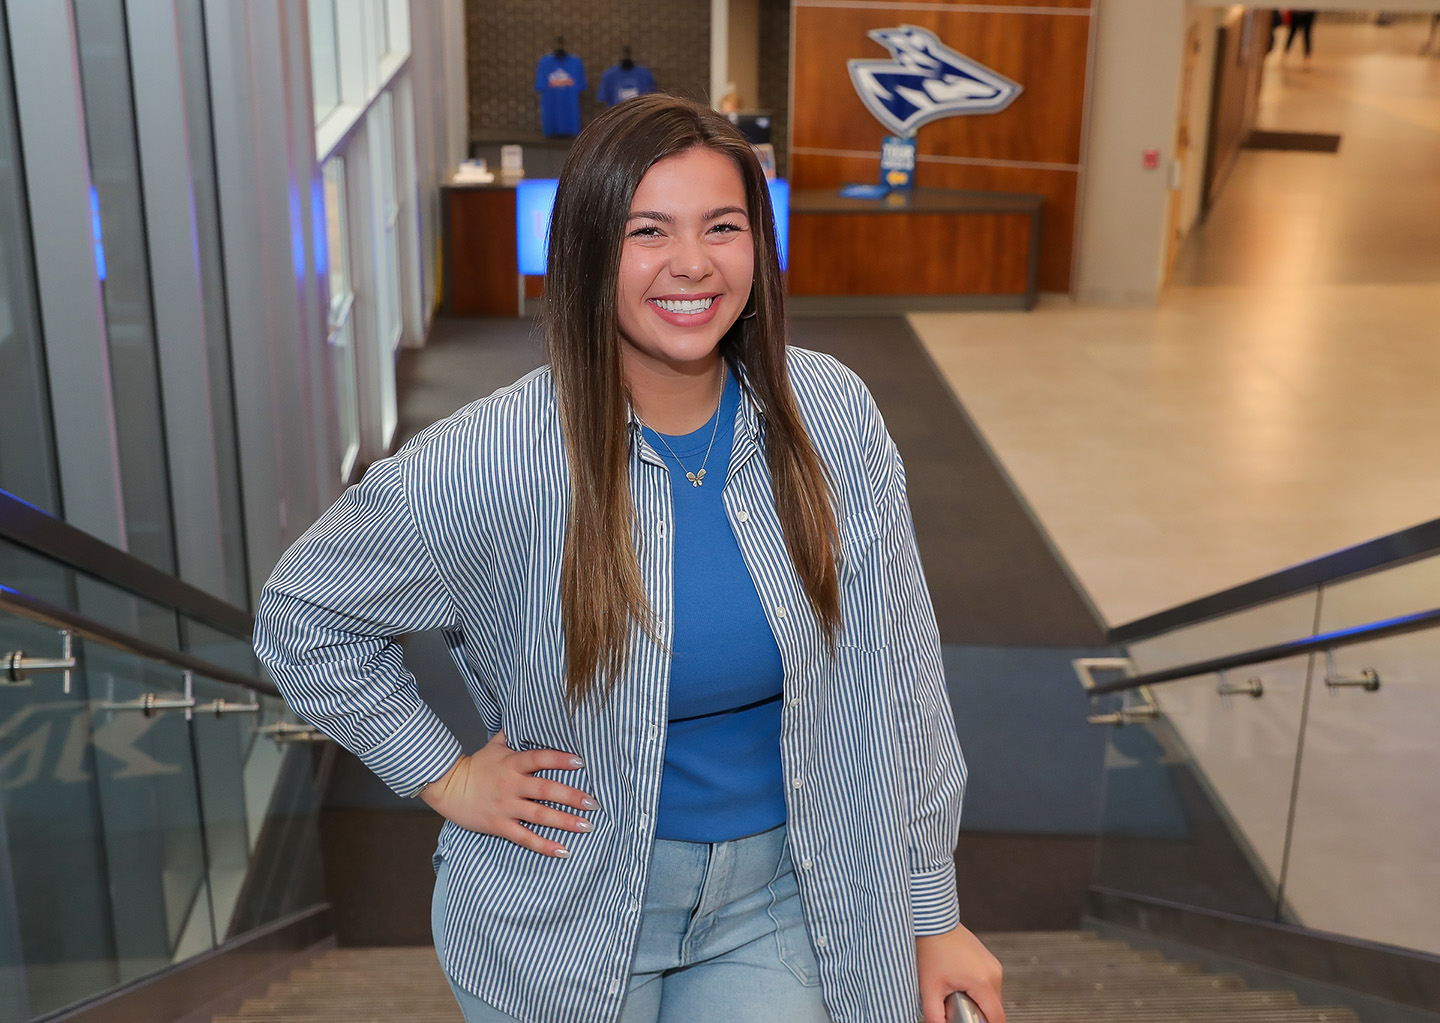 “There’s no way to put into words what UNK has done for me as a person,” Katie Cornelio says. “It’s challenging. It pushes you to be your best. But also you literally have people with you every step of the way to guide you and cheer you on.” (Photo by Erika Pritchard, UNK Communications)